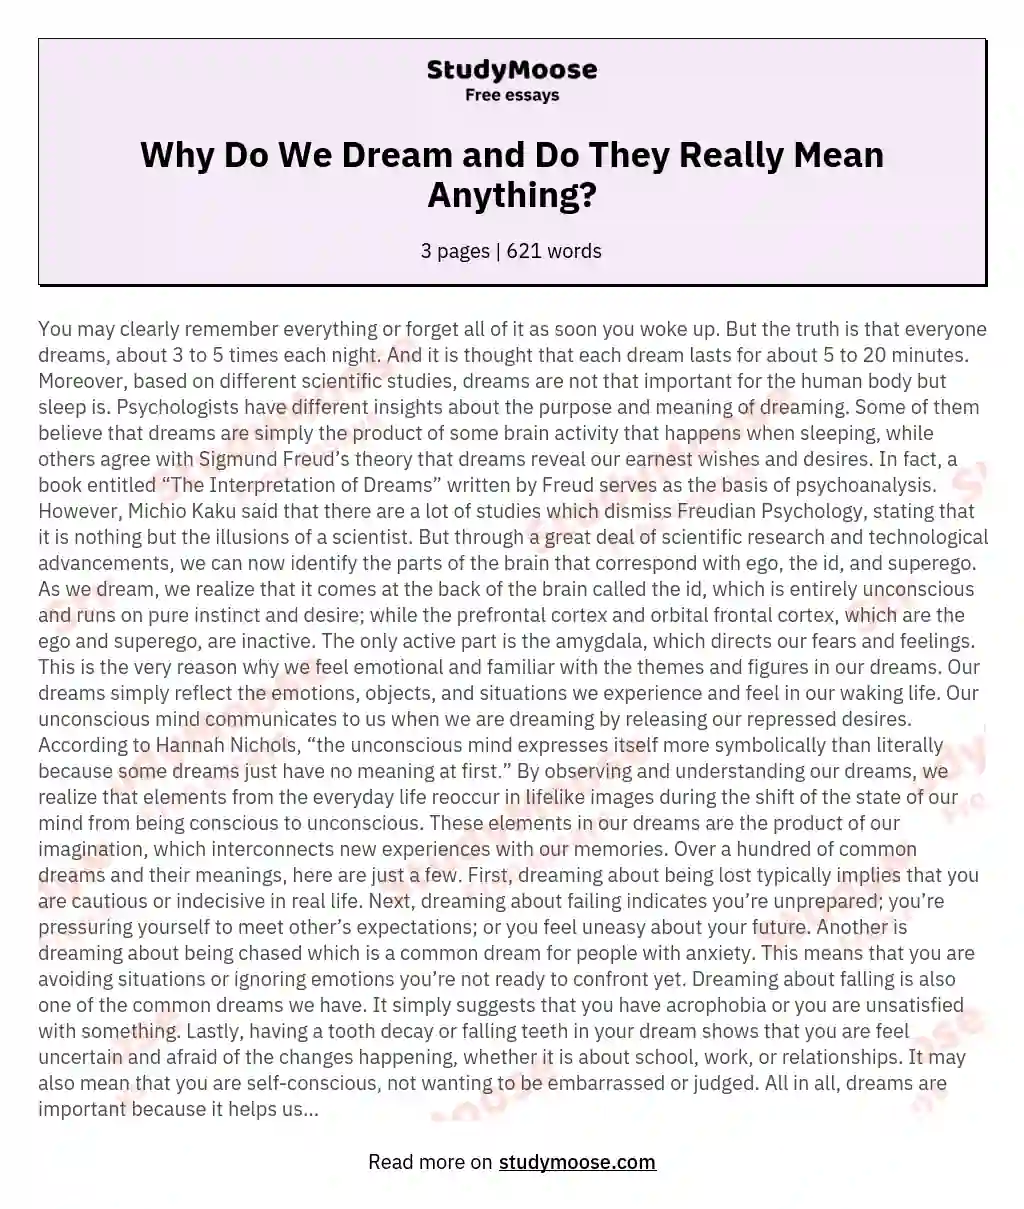 Why Do We Dream and Do They Really Mean Anything?